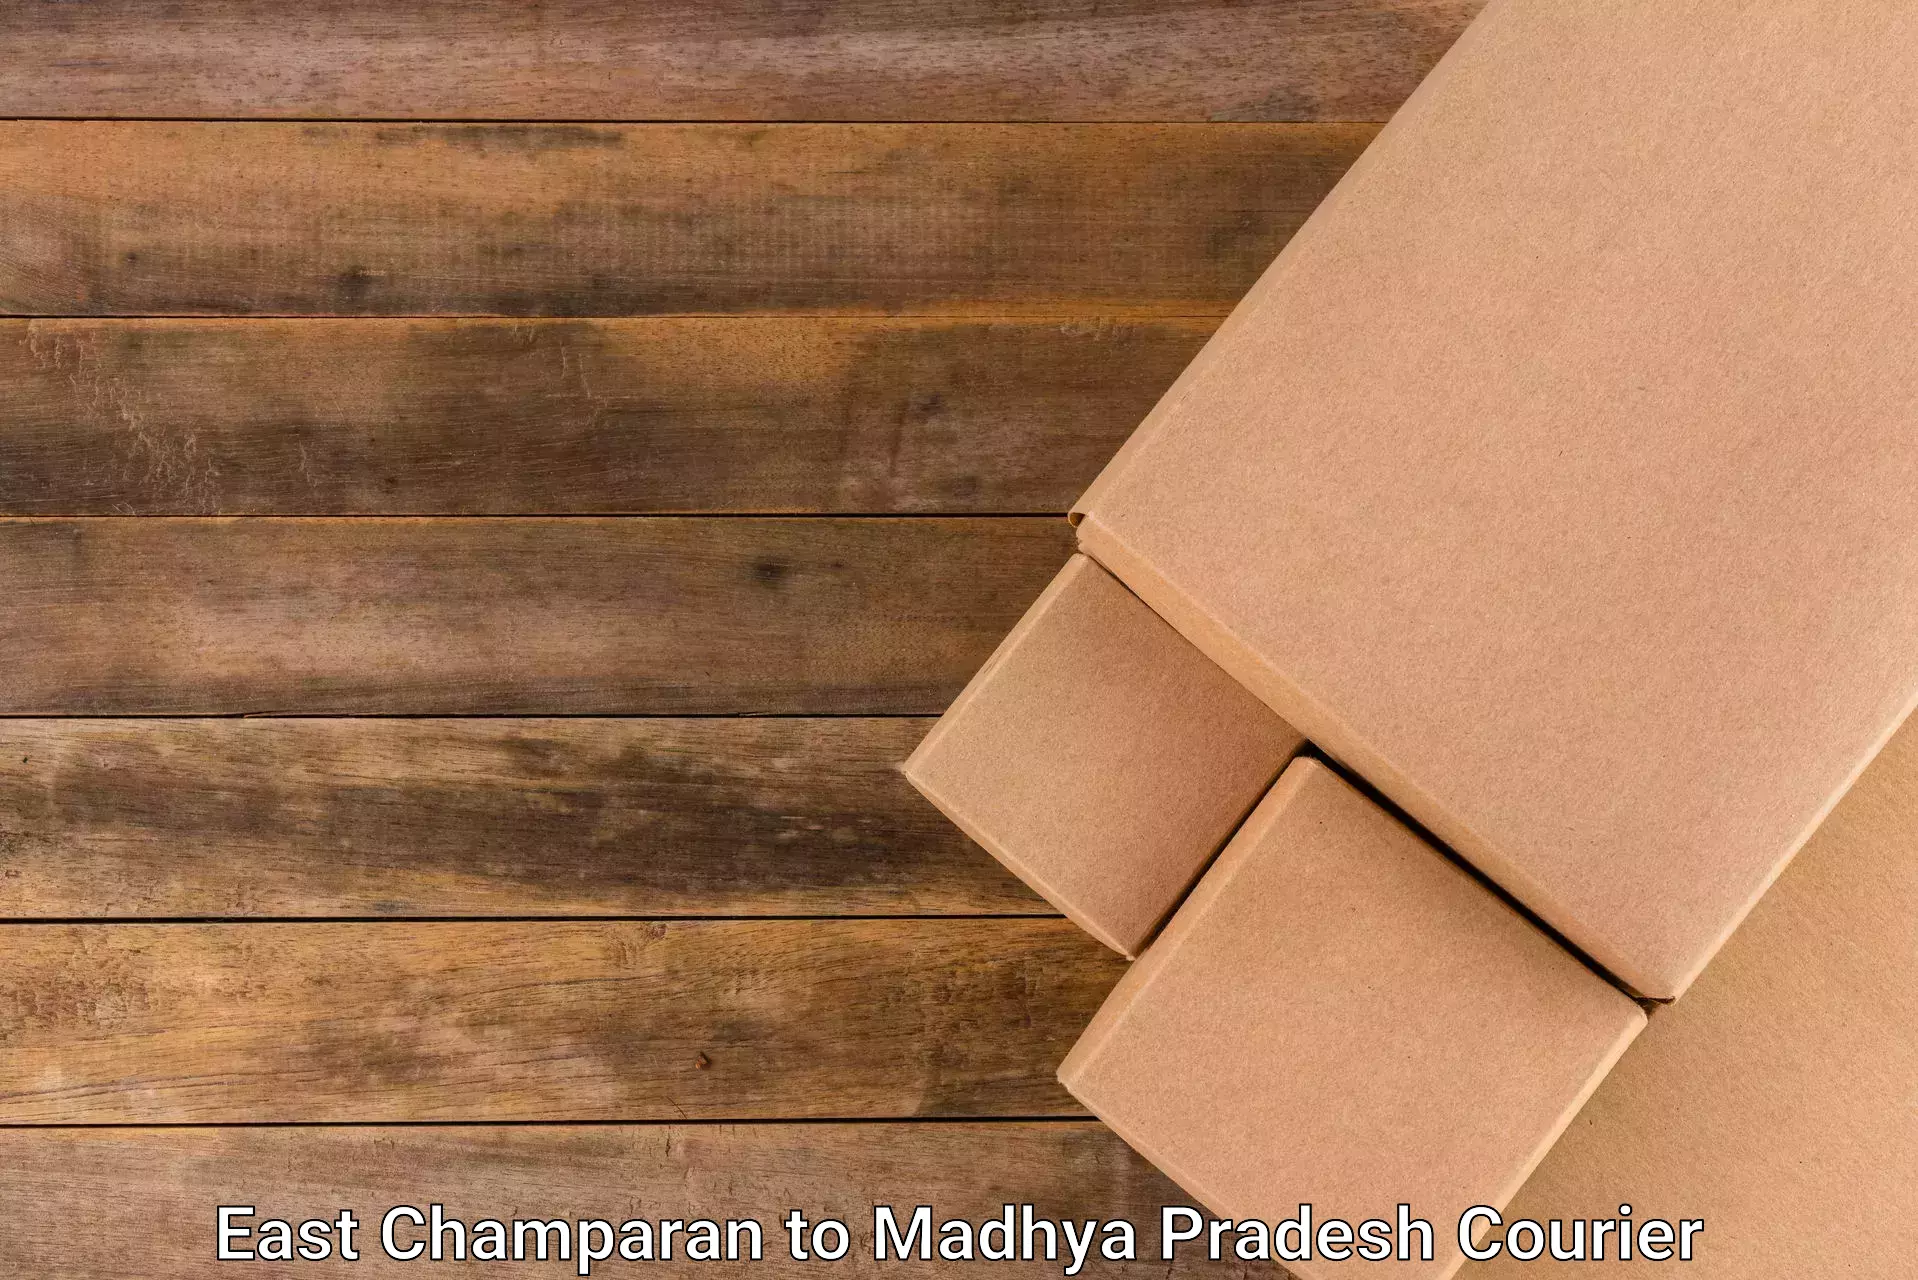 High-speed parcel service East Champaran to Khandwa